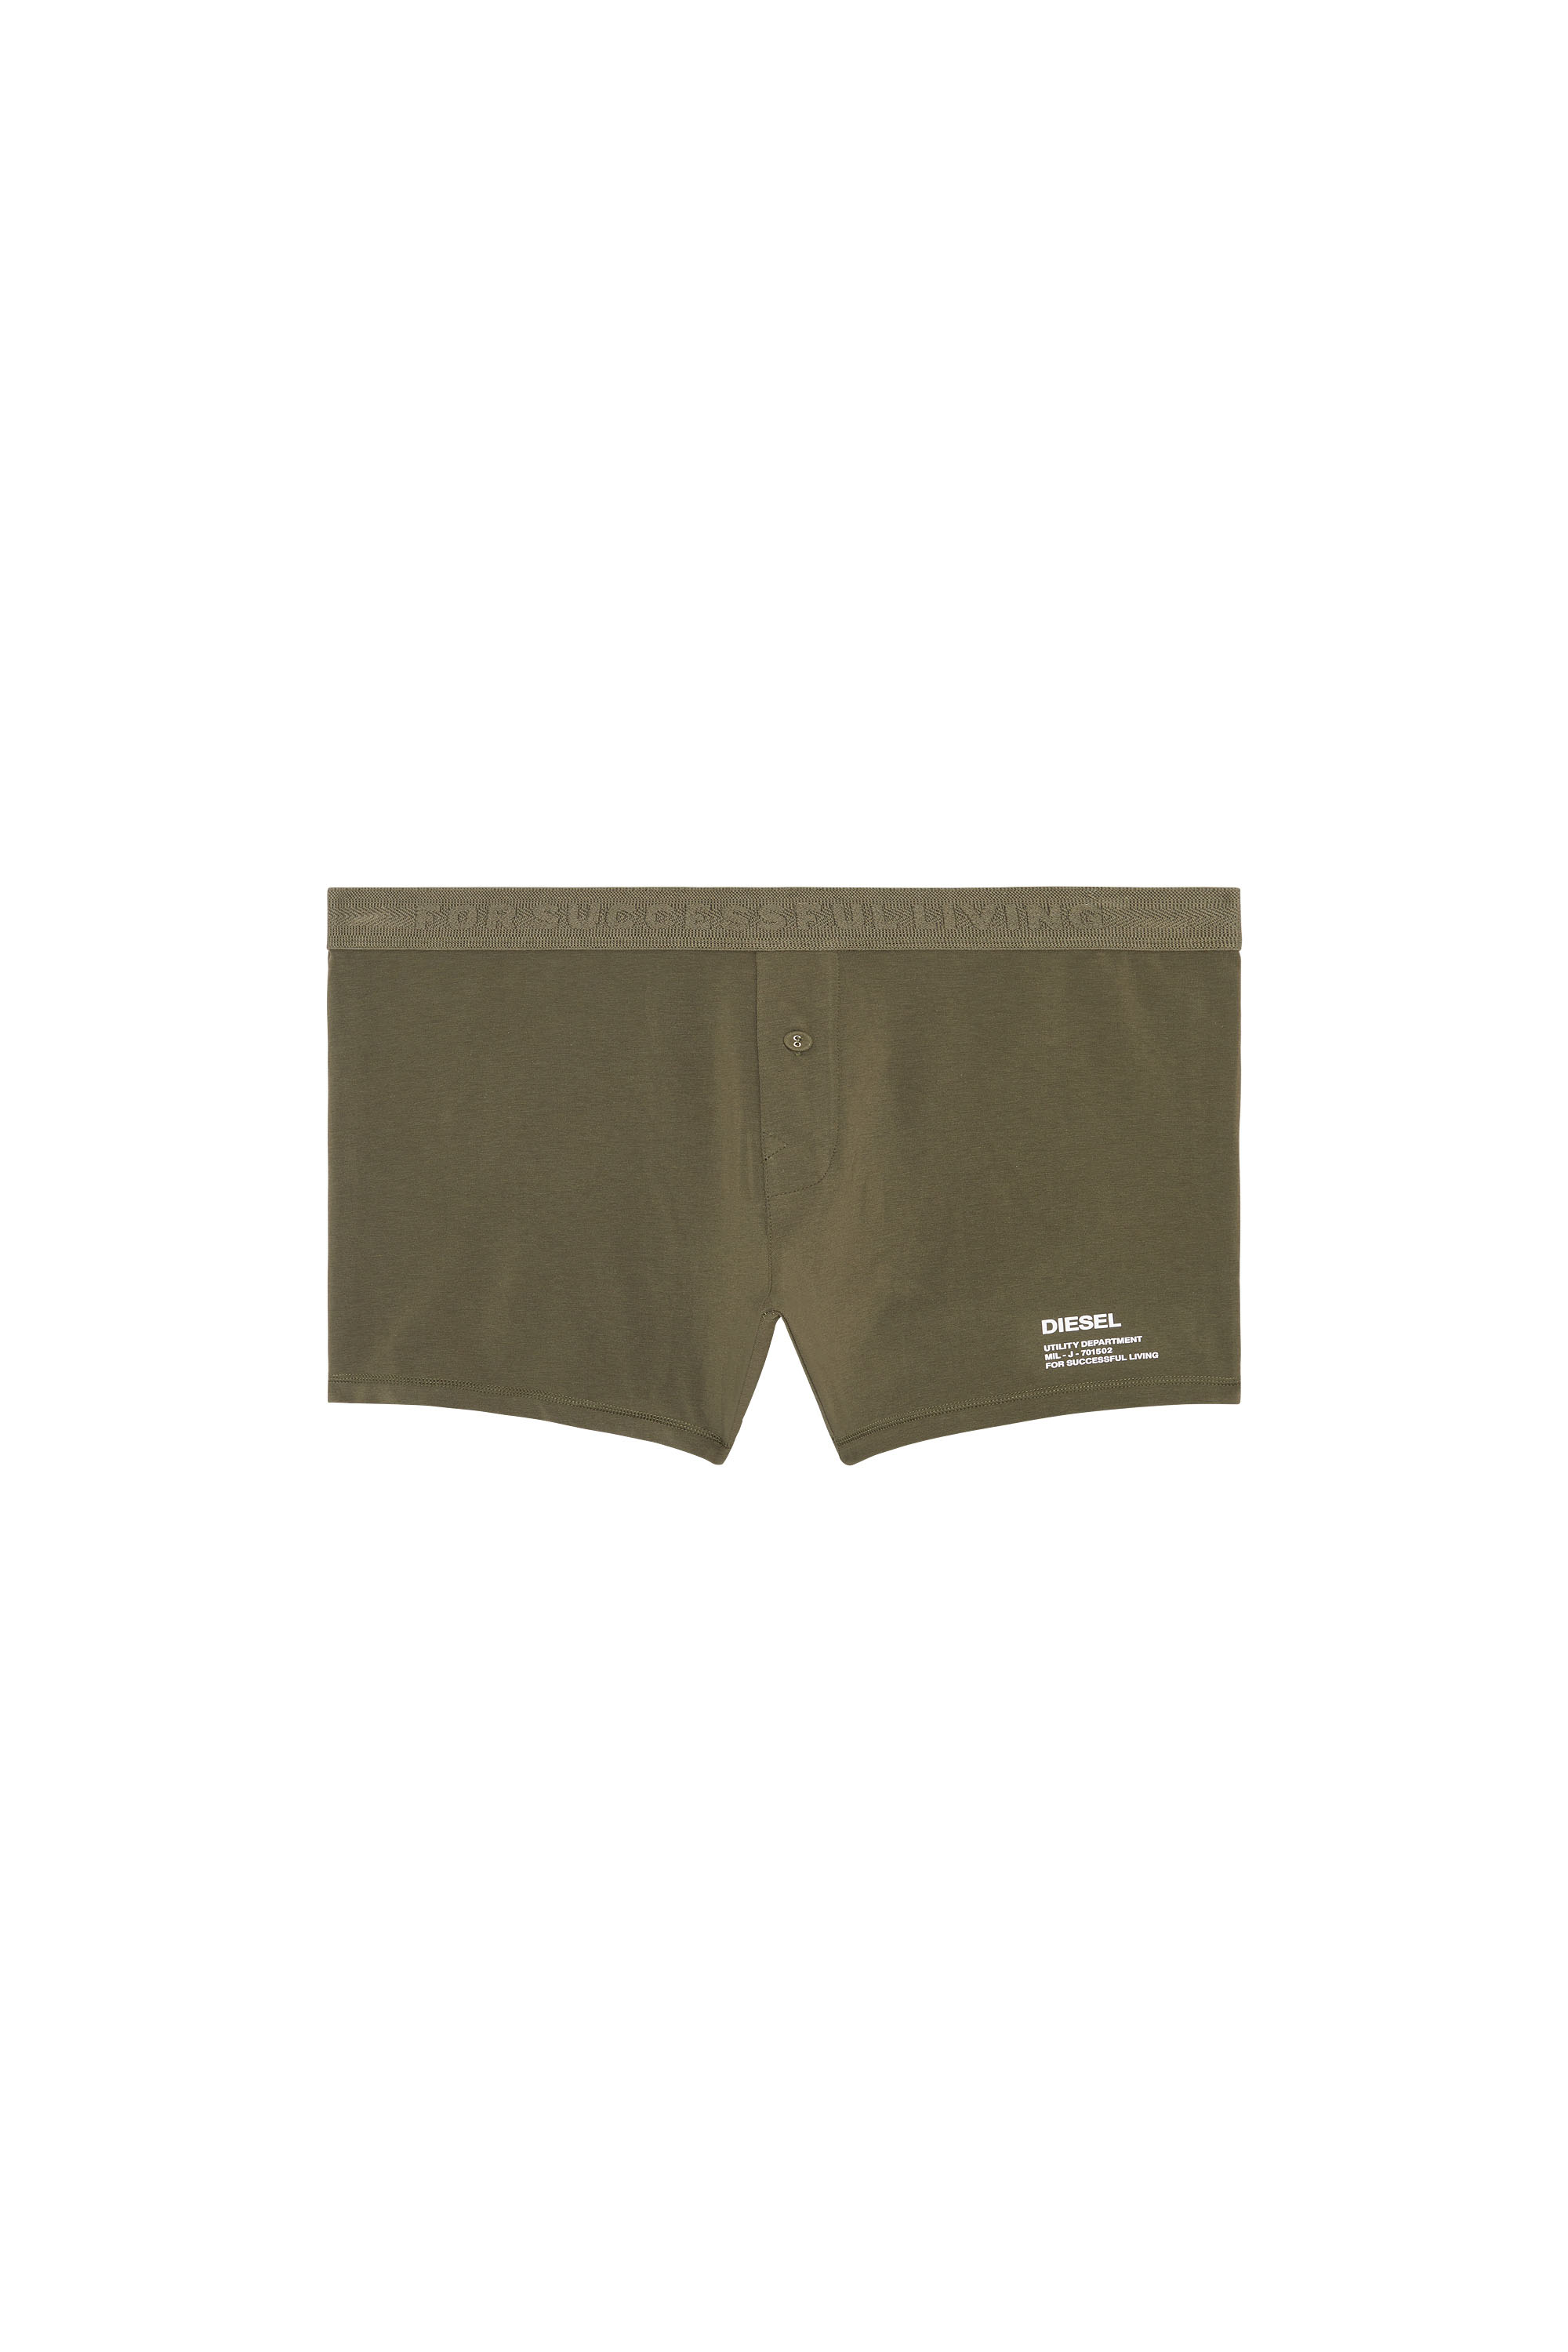 Diesel - Boxers with utility logo print - Boxer briefs - Man - Green